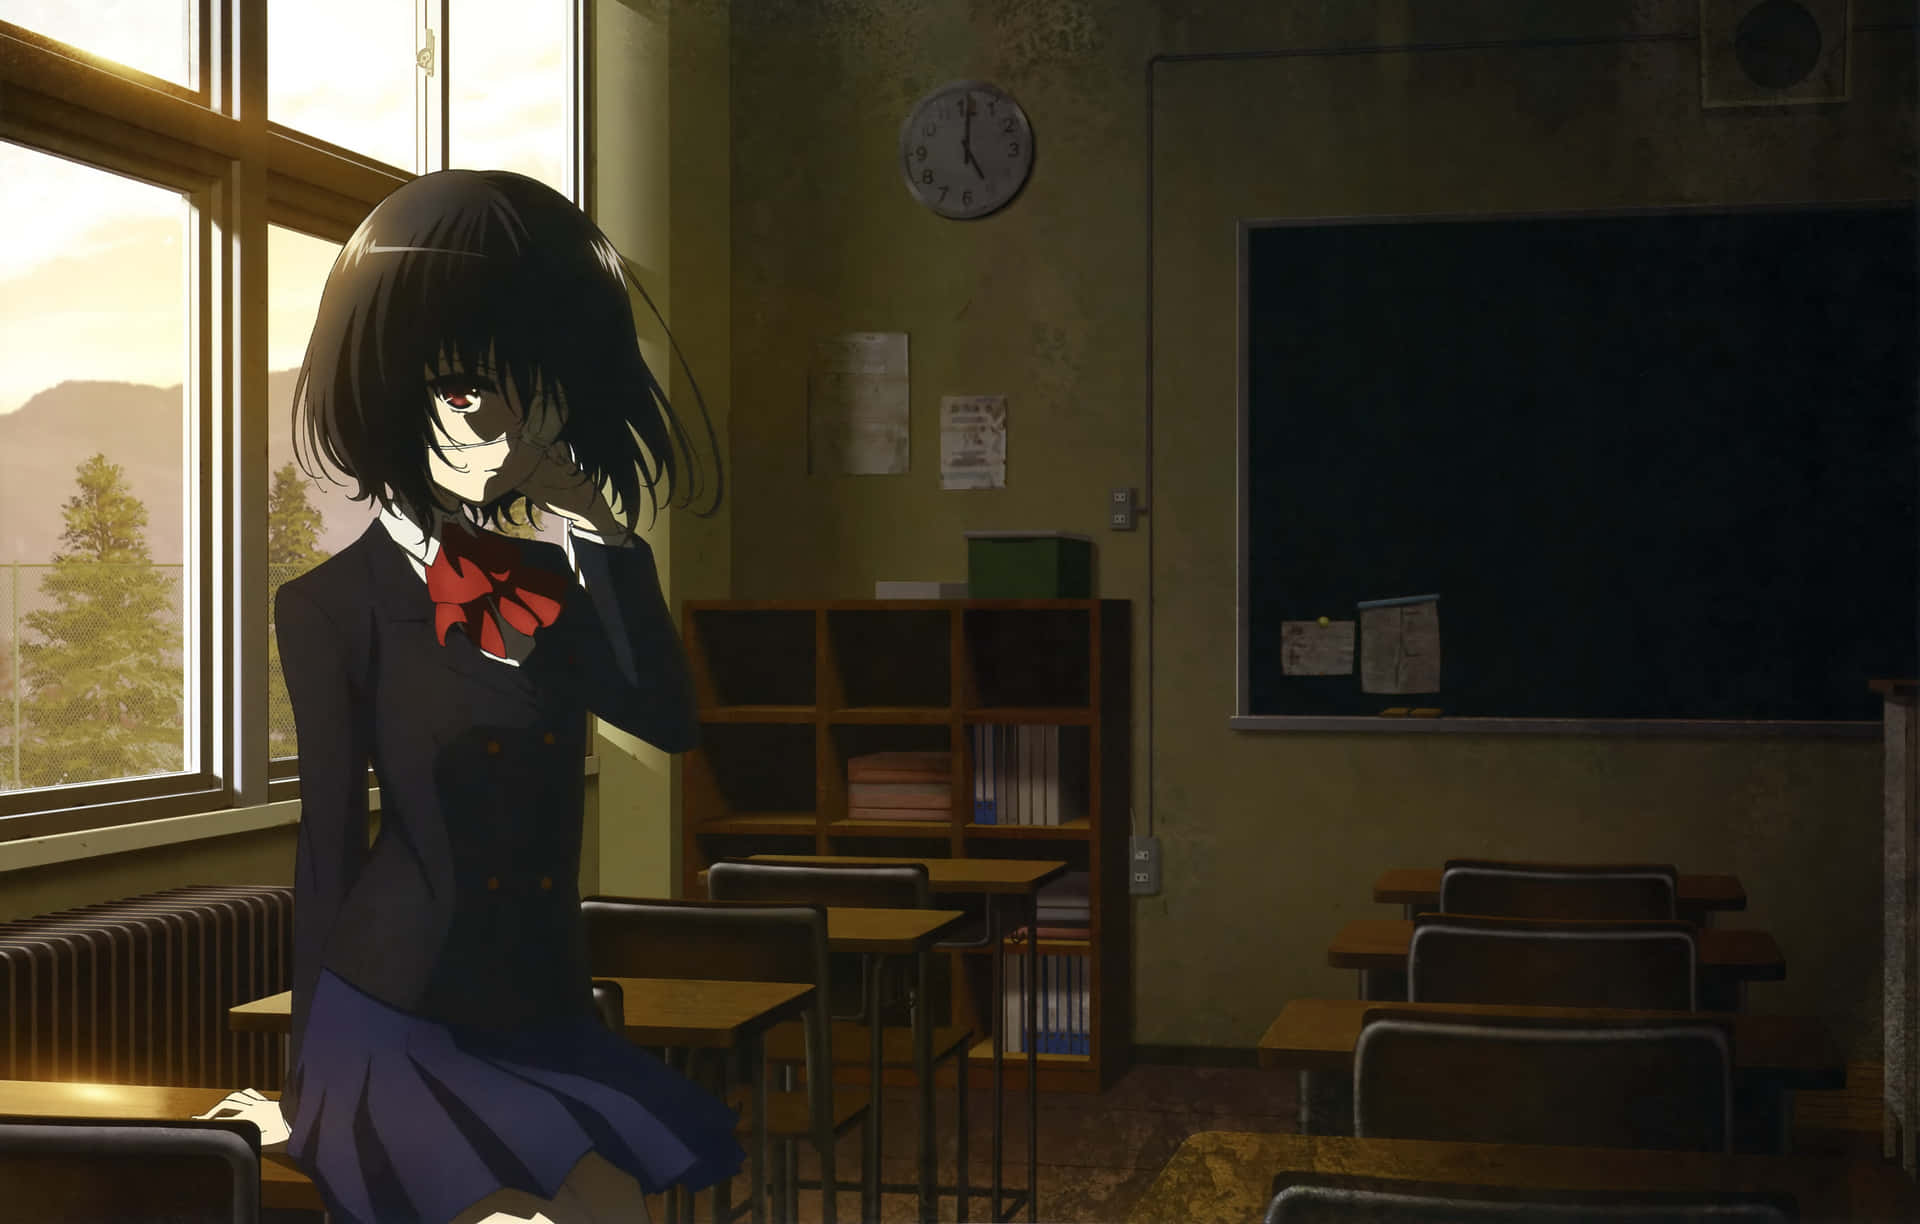 A Girl In A School Uniform Standing In Front Of A Window